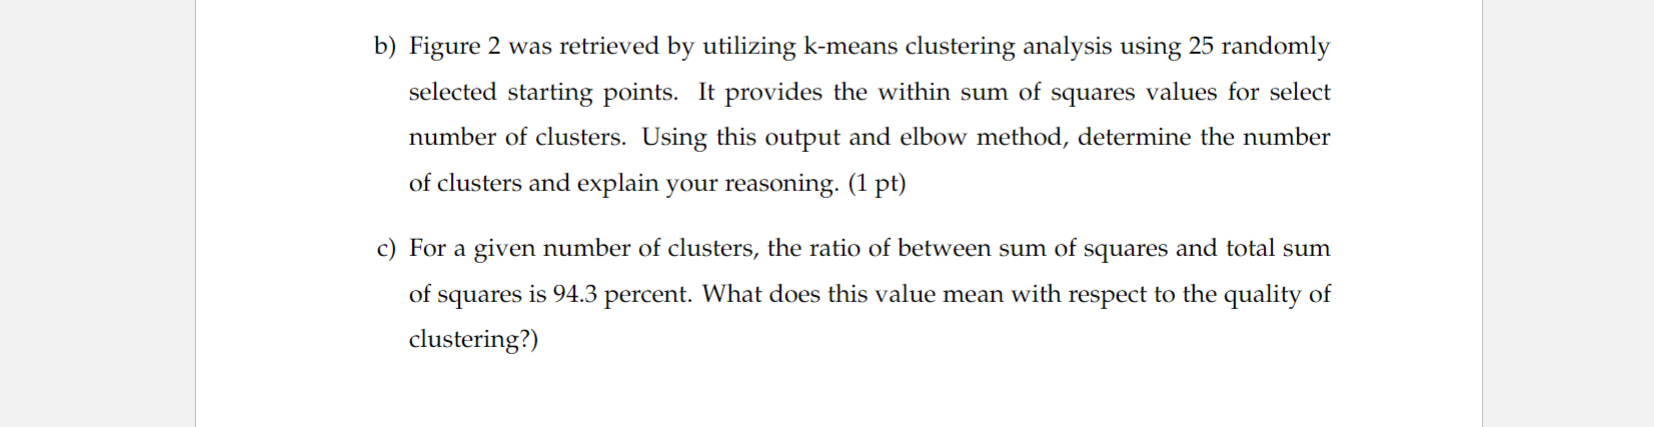 b) Figure 2 was retrieved by utilizing k-means clustering analysis using 25 randomly selected starting